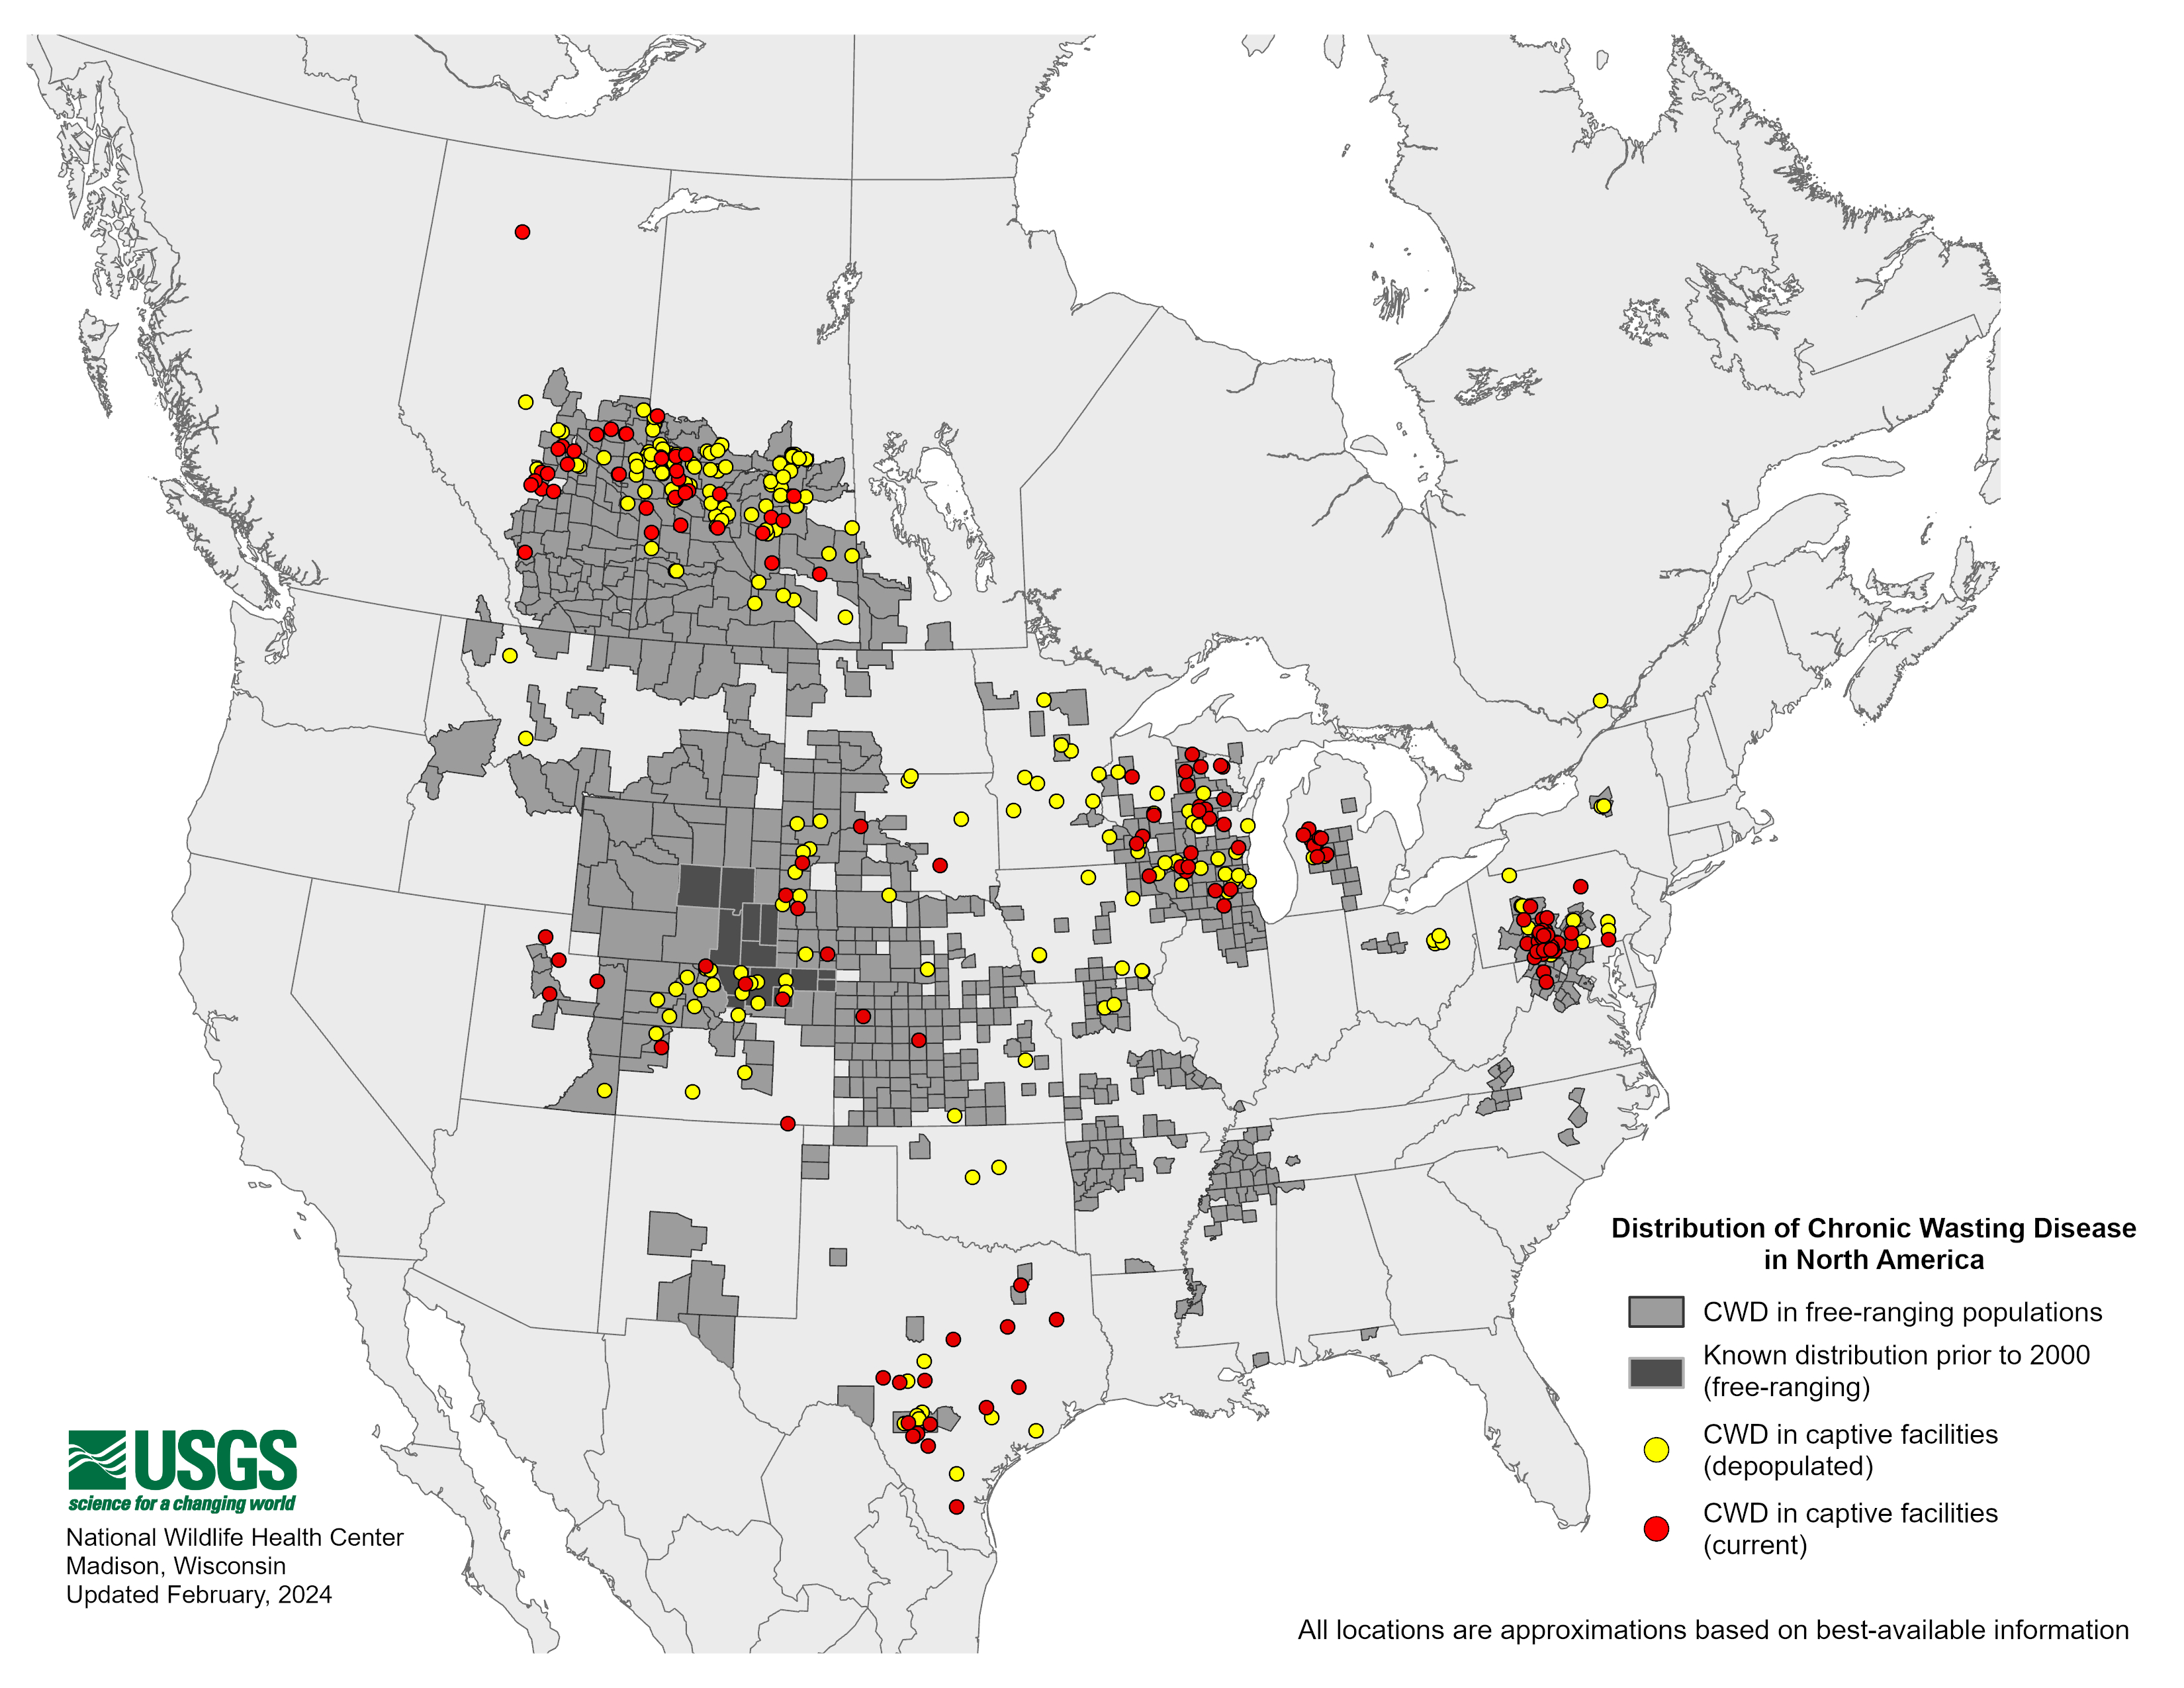 A map shows the distribution of chronic wasting disease in North America. In Canada, it is prominent in free-ranging populations in Alberta and Manitoba.